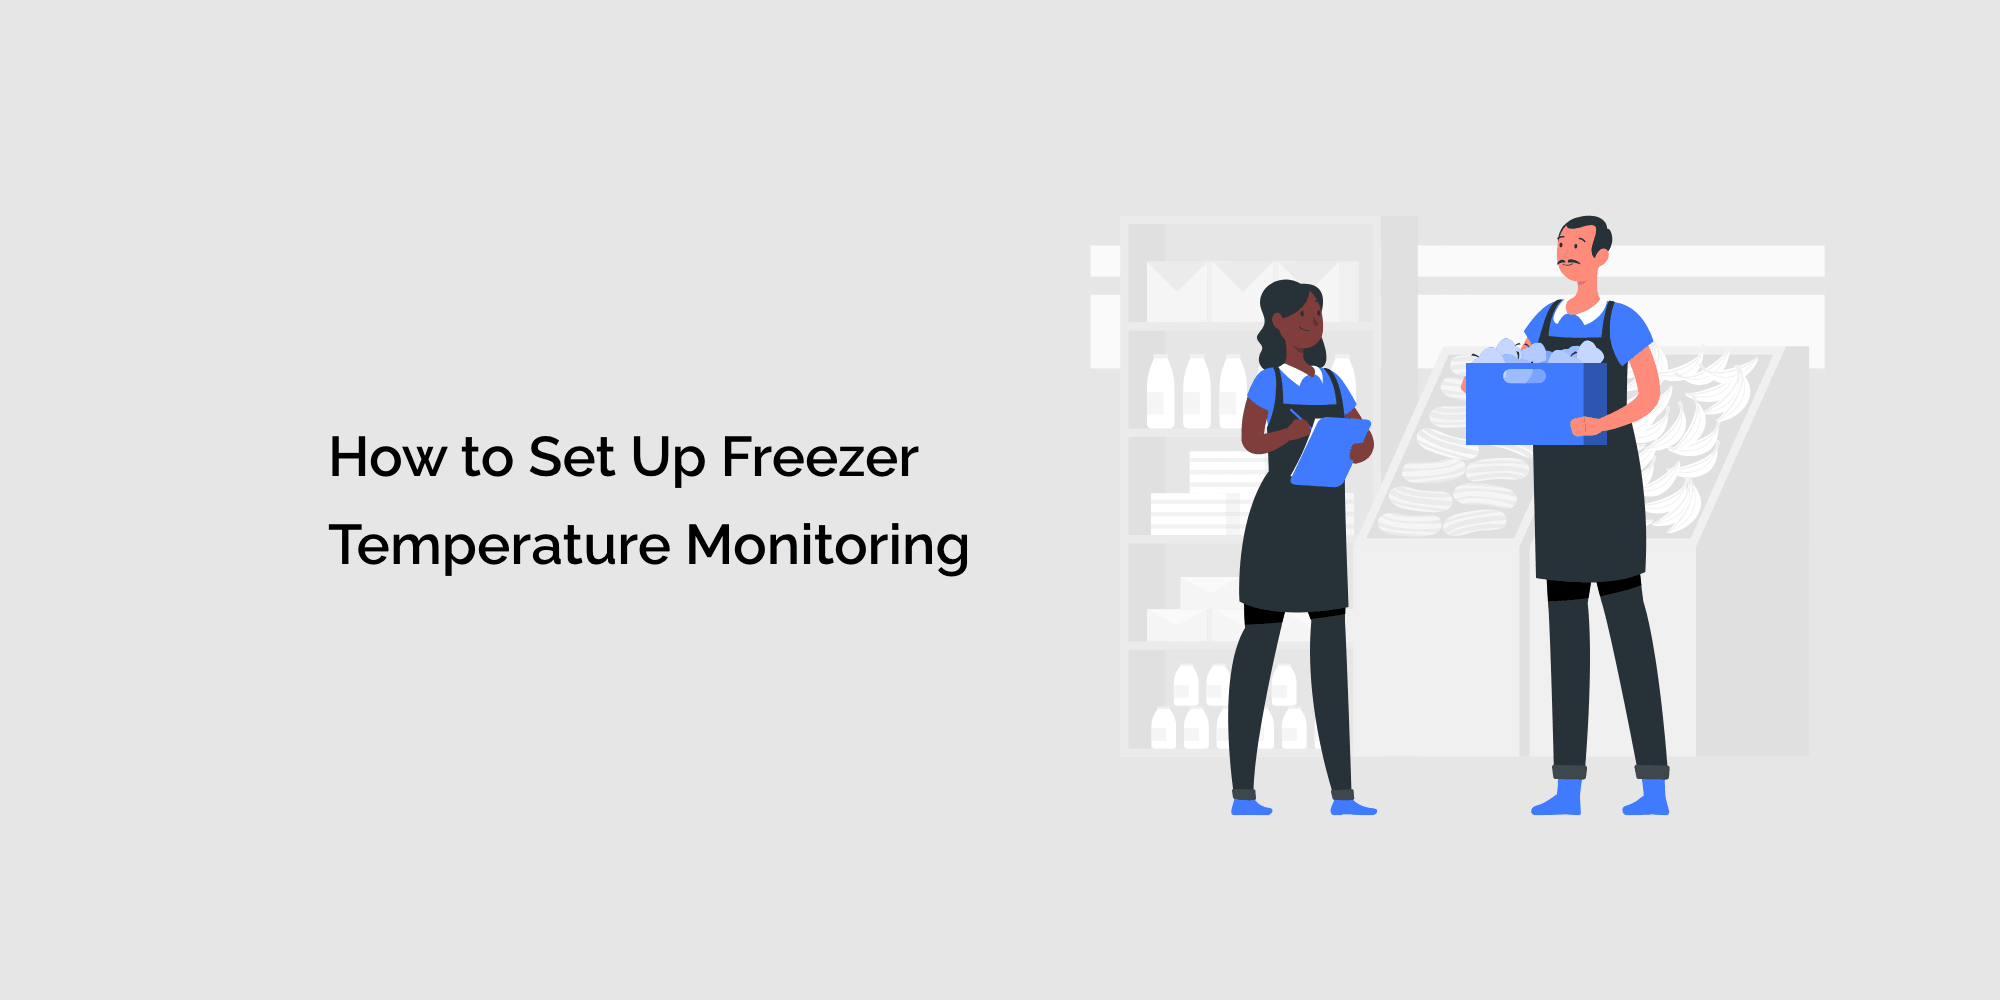 How to Set Up Freezer Temperature Monitoring